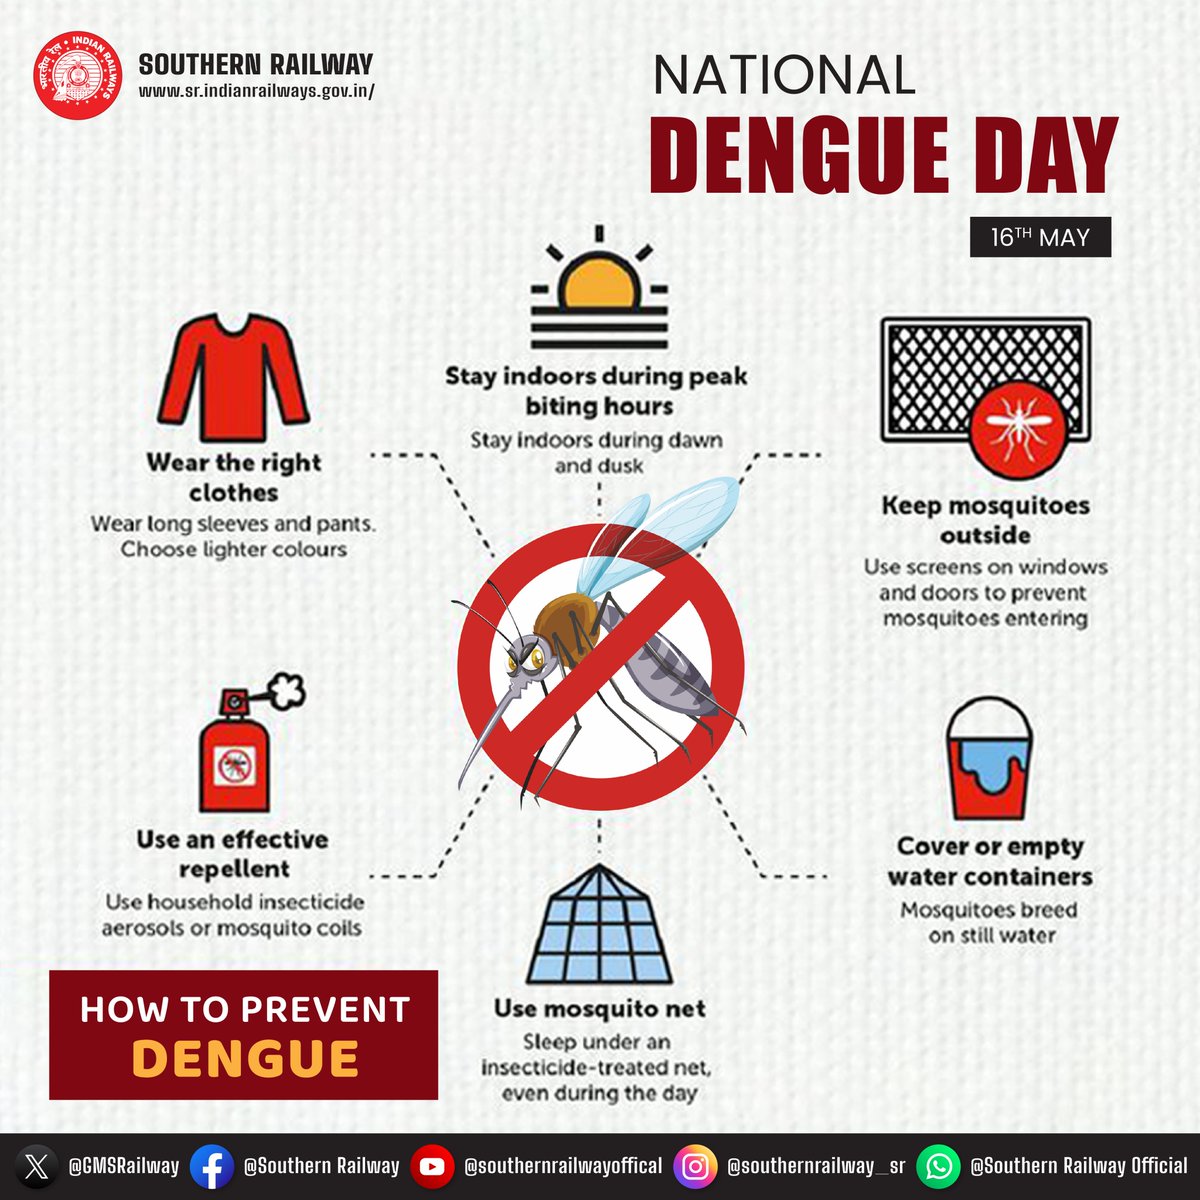 Let's raise awareness and implement safety measures to stop its spread and protect our communities. #NationalDengueDay #StopDengueSpread #StaySafe